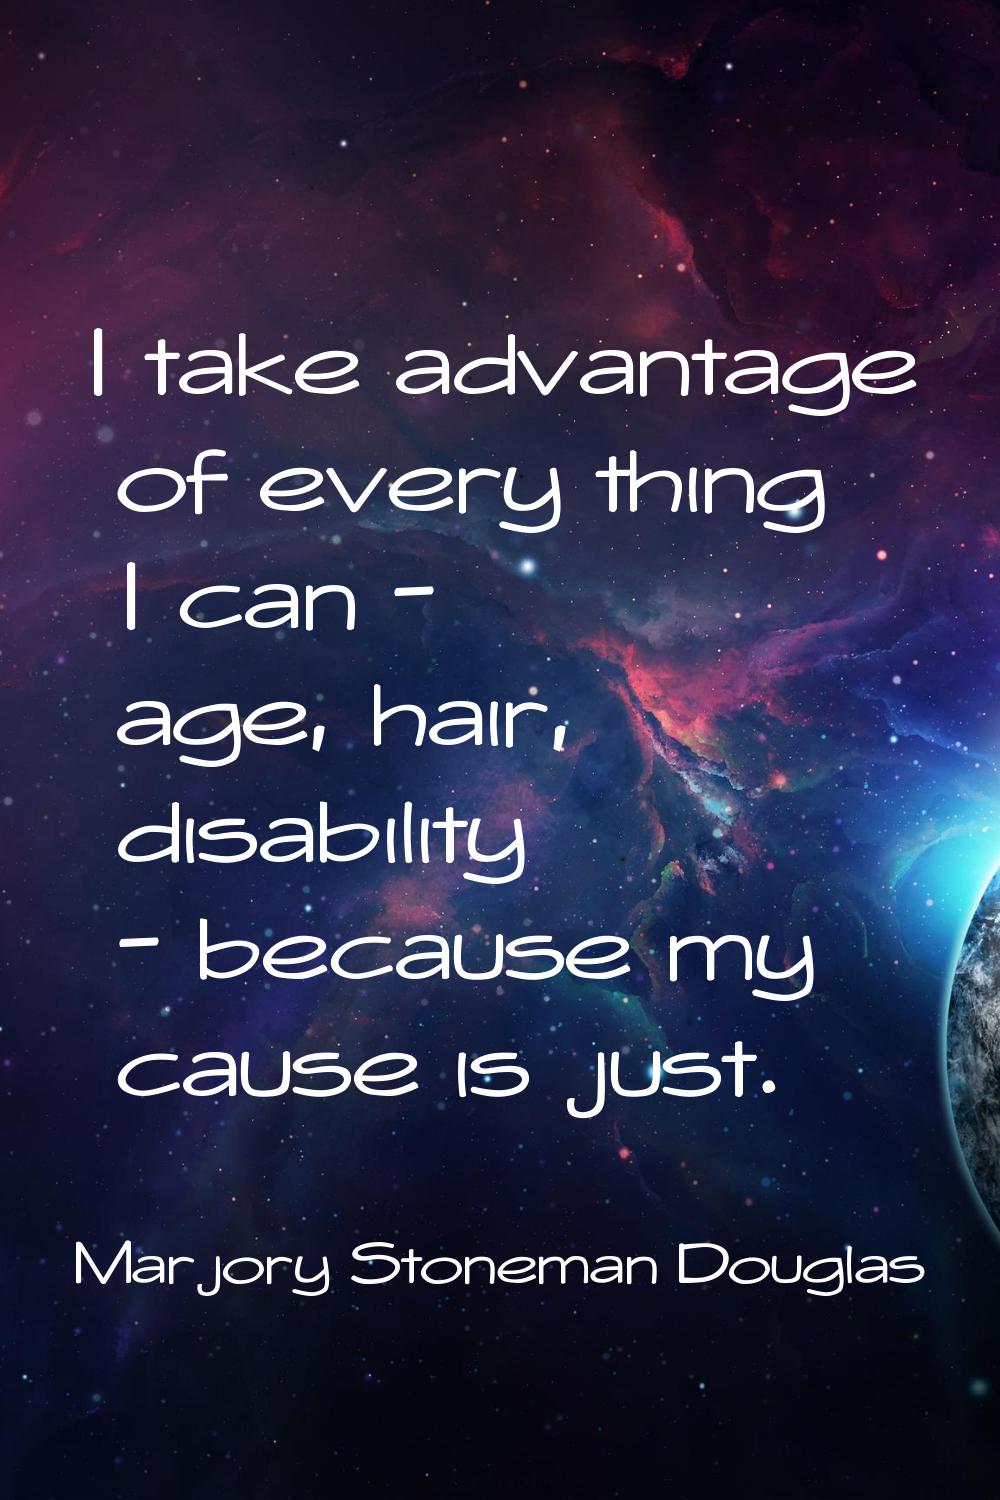 I take advantage of every thing I can - age, hair, disability - because my cause is just.